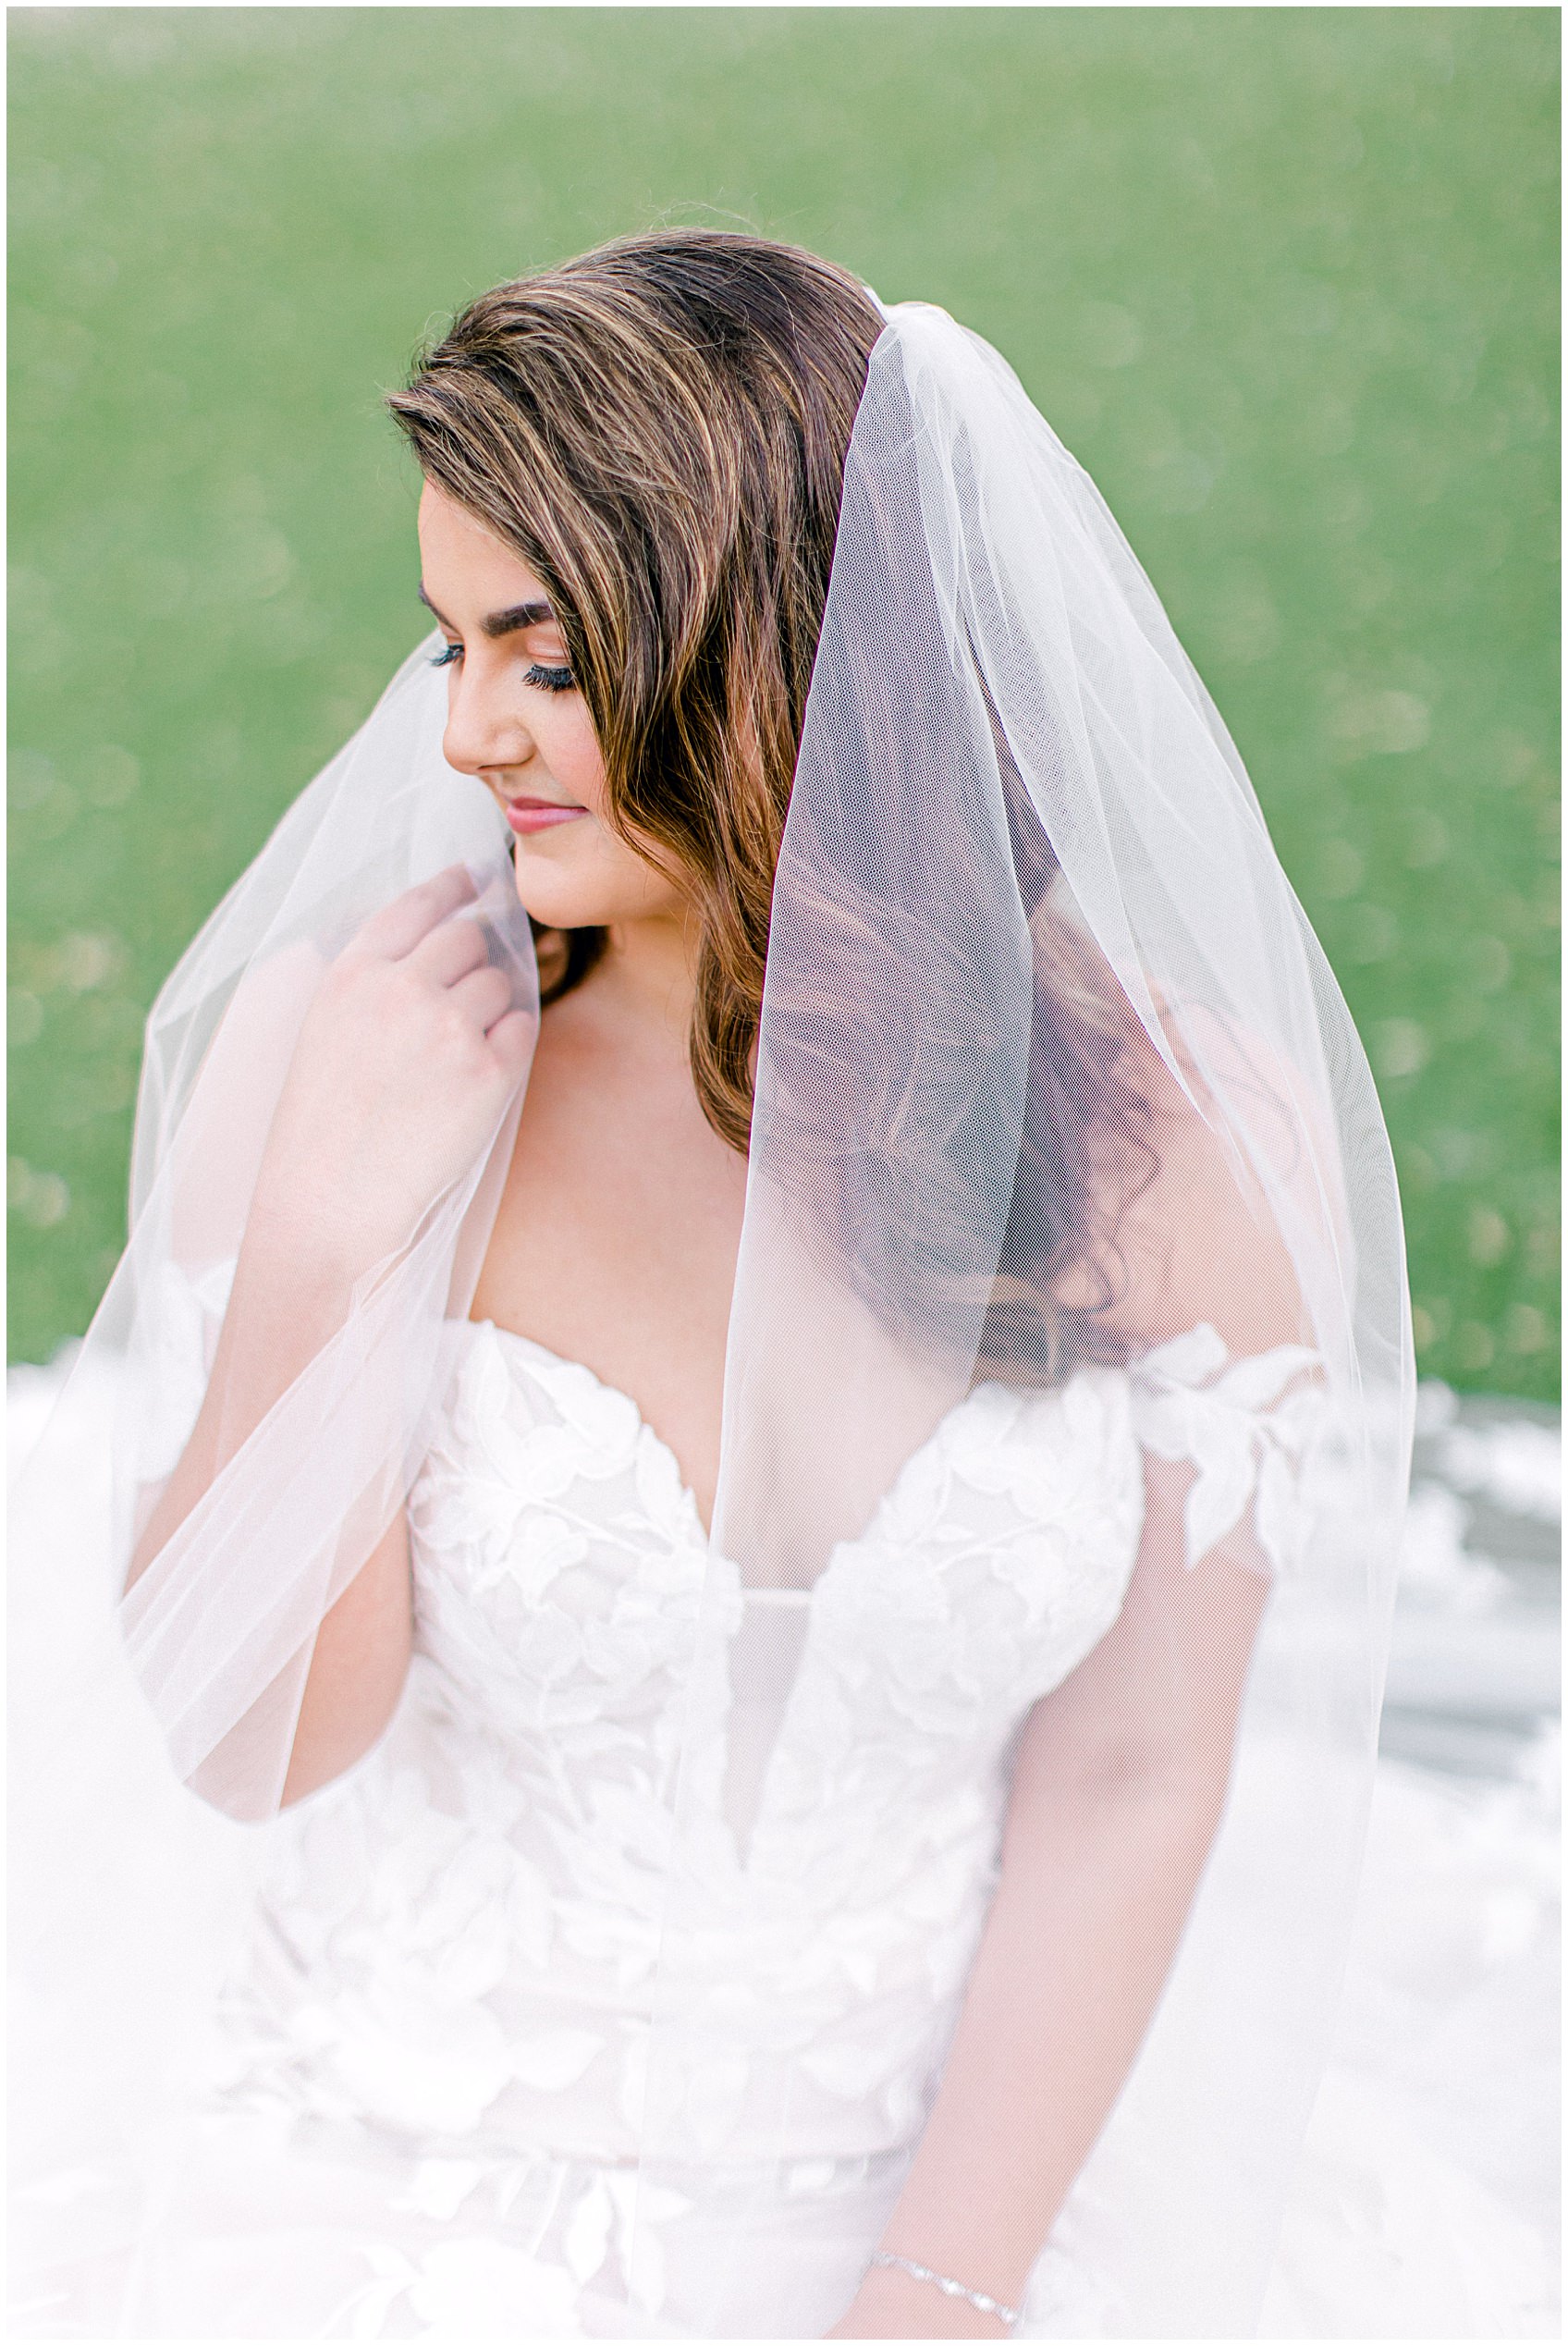 Woodbine Mansion Spring Bridal wedding Photos by Allison Jeffers Photography 0027